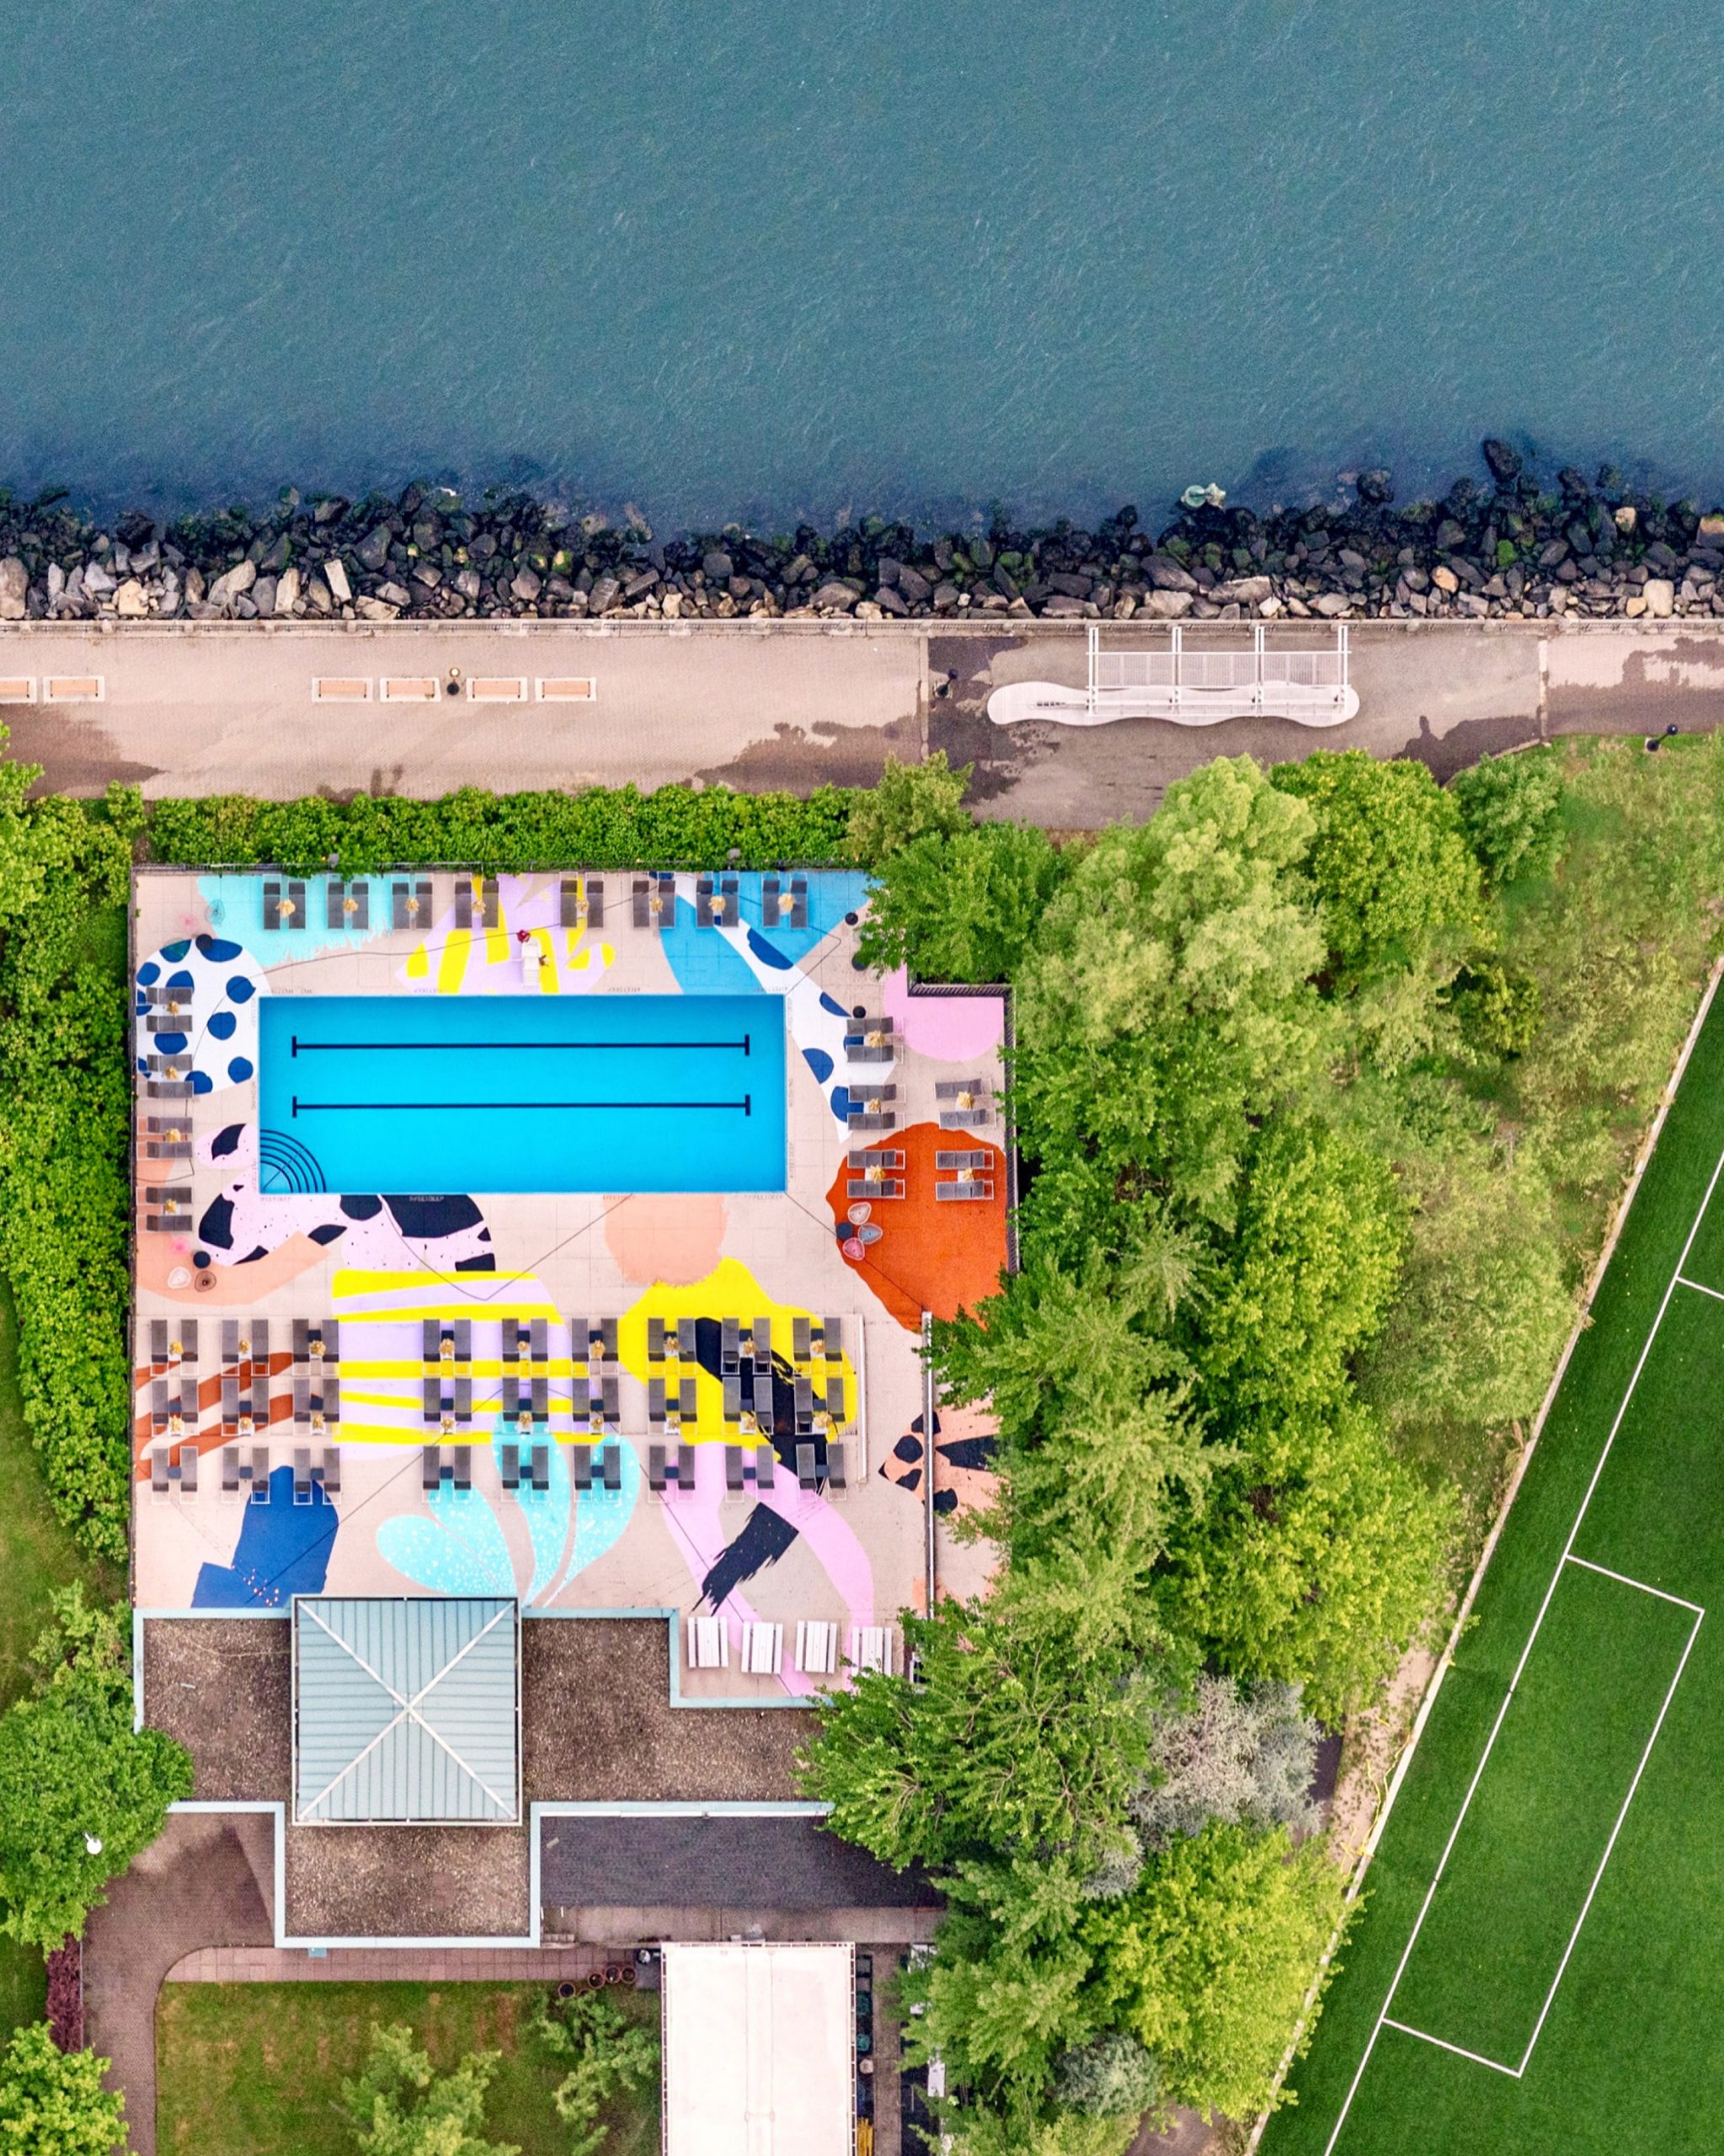 The Manhattan pool's graphic mural by Alex Proba